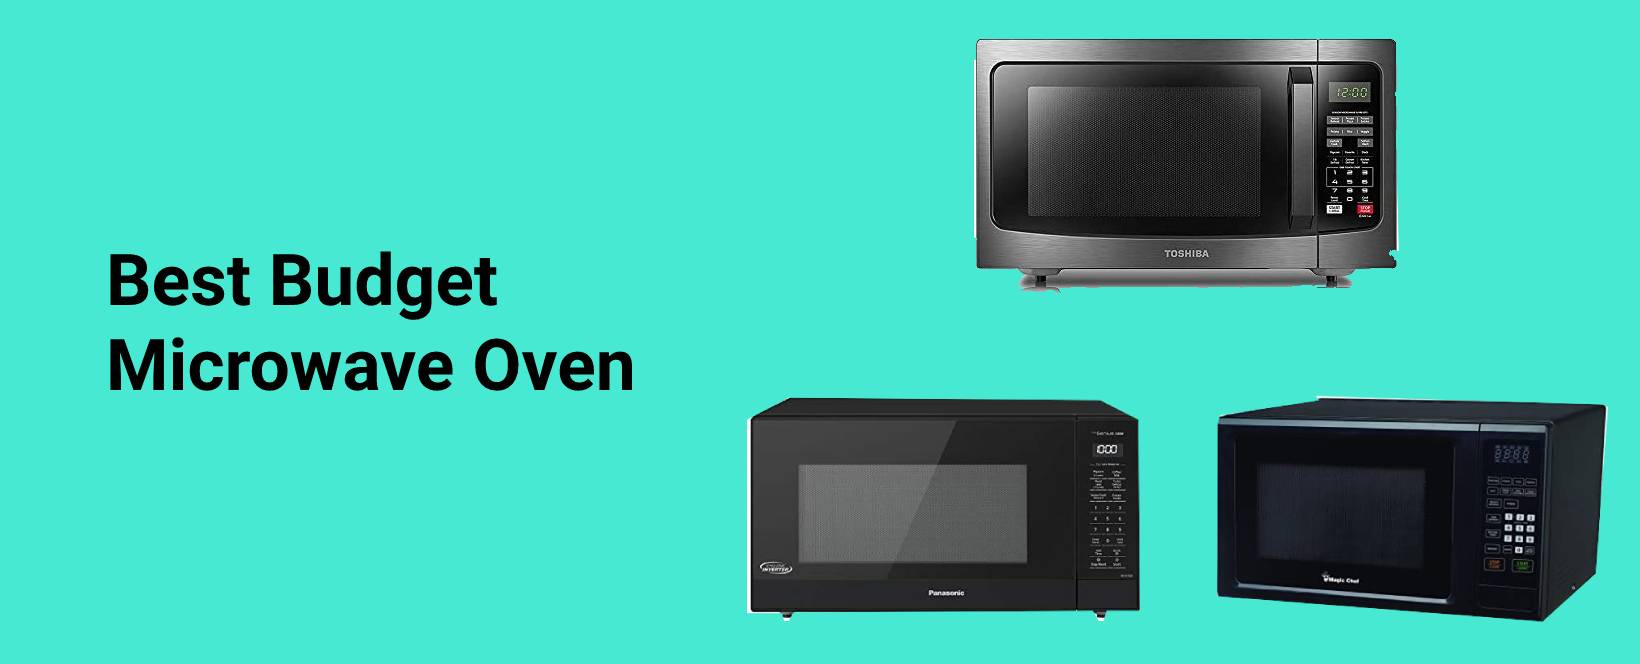 best affordable microwave oven